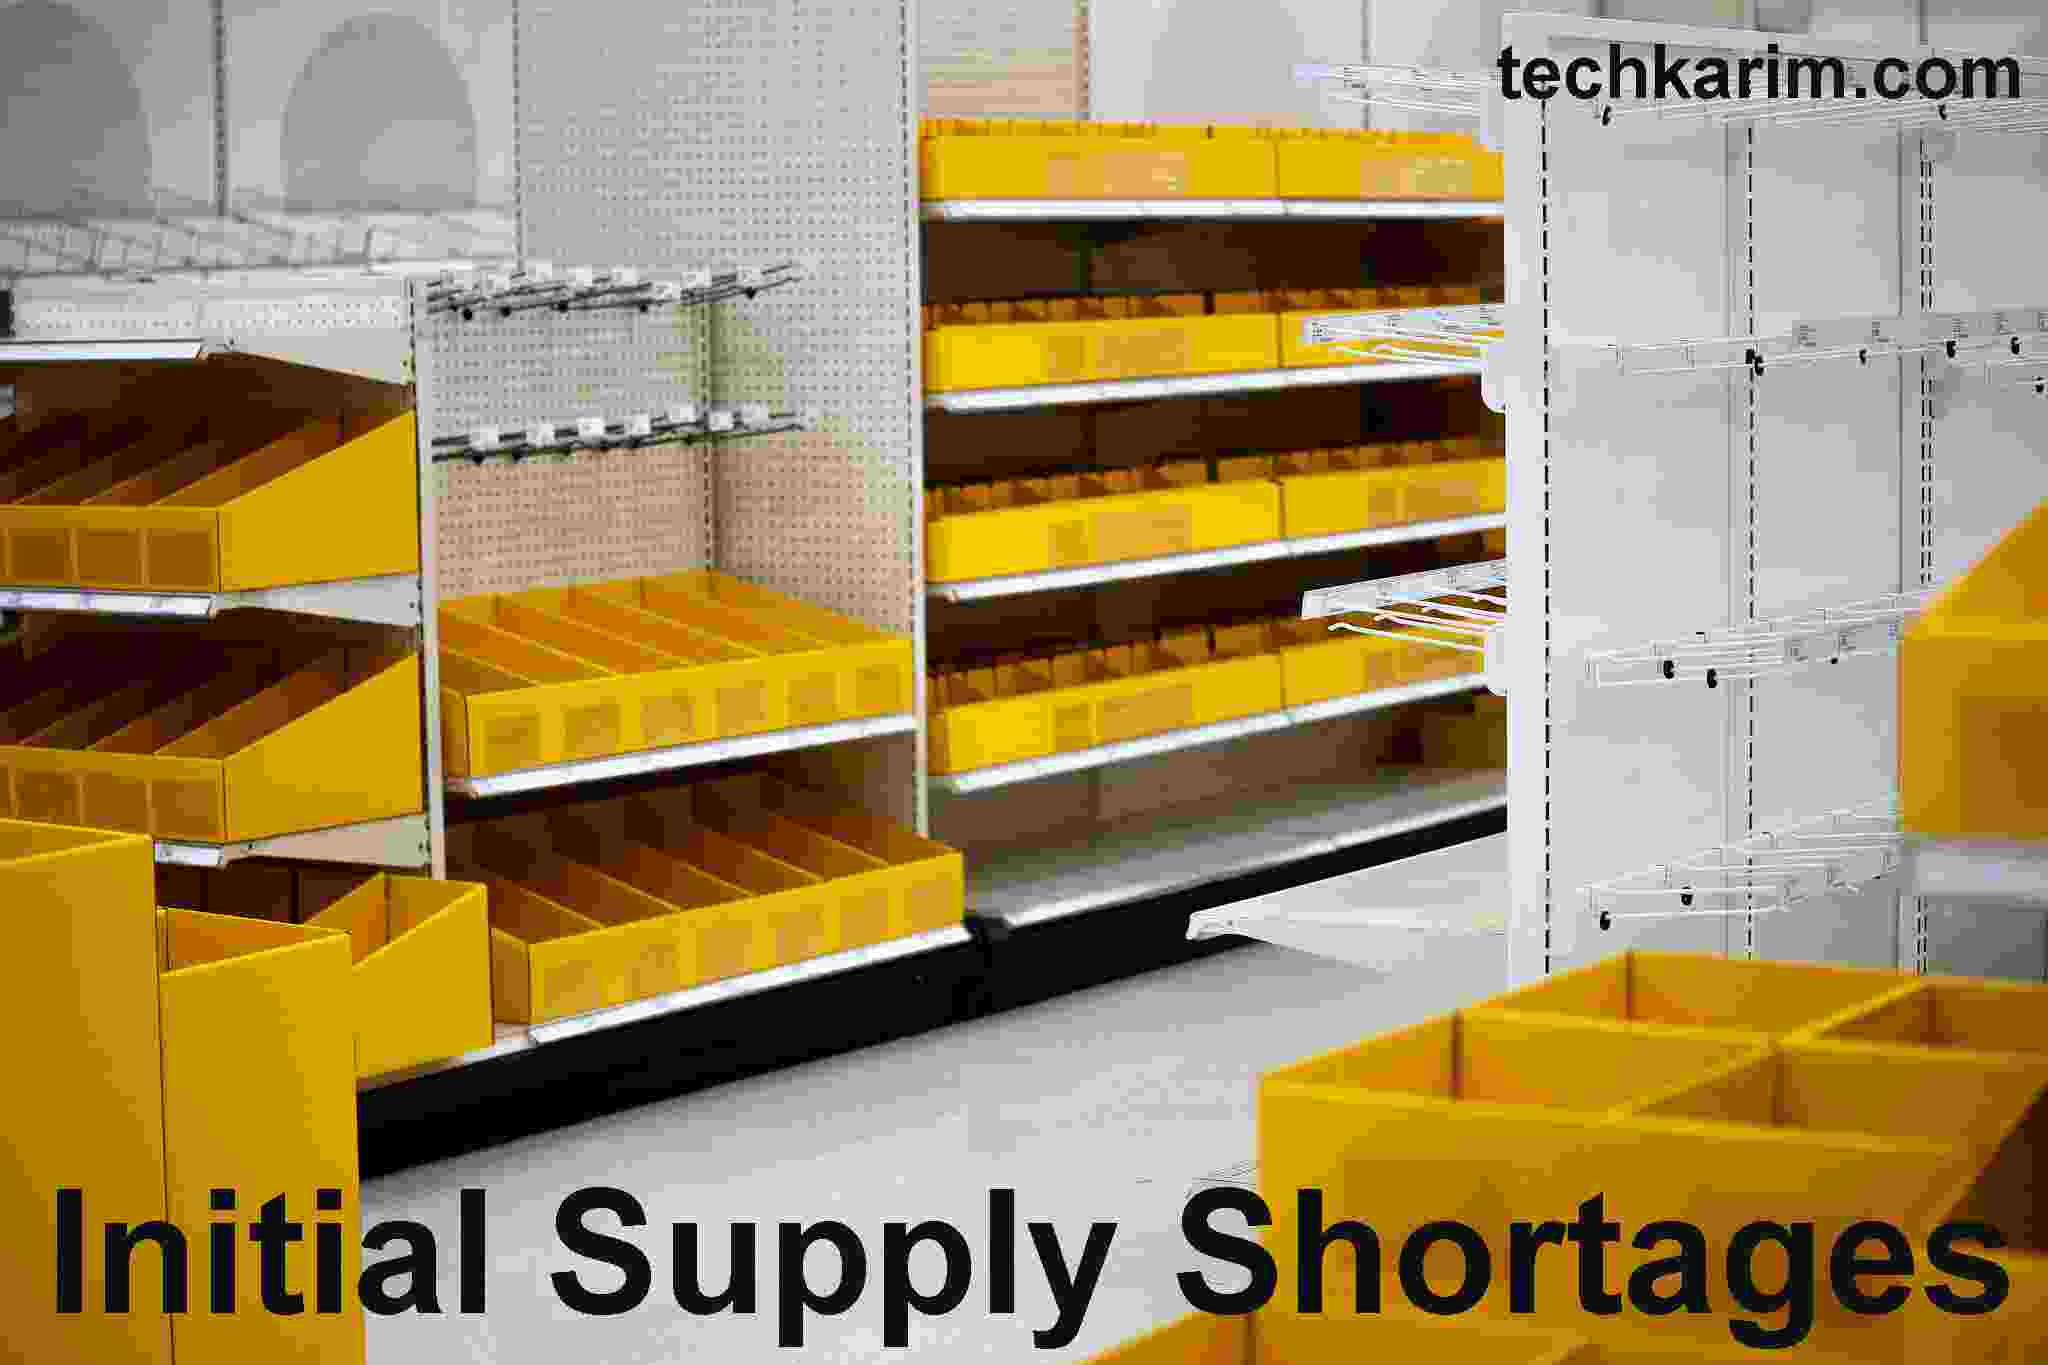 Initial Supply Shortages